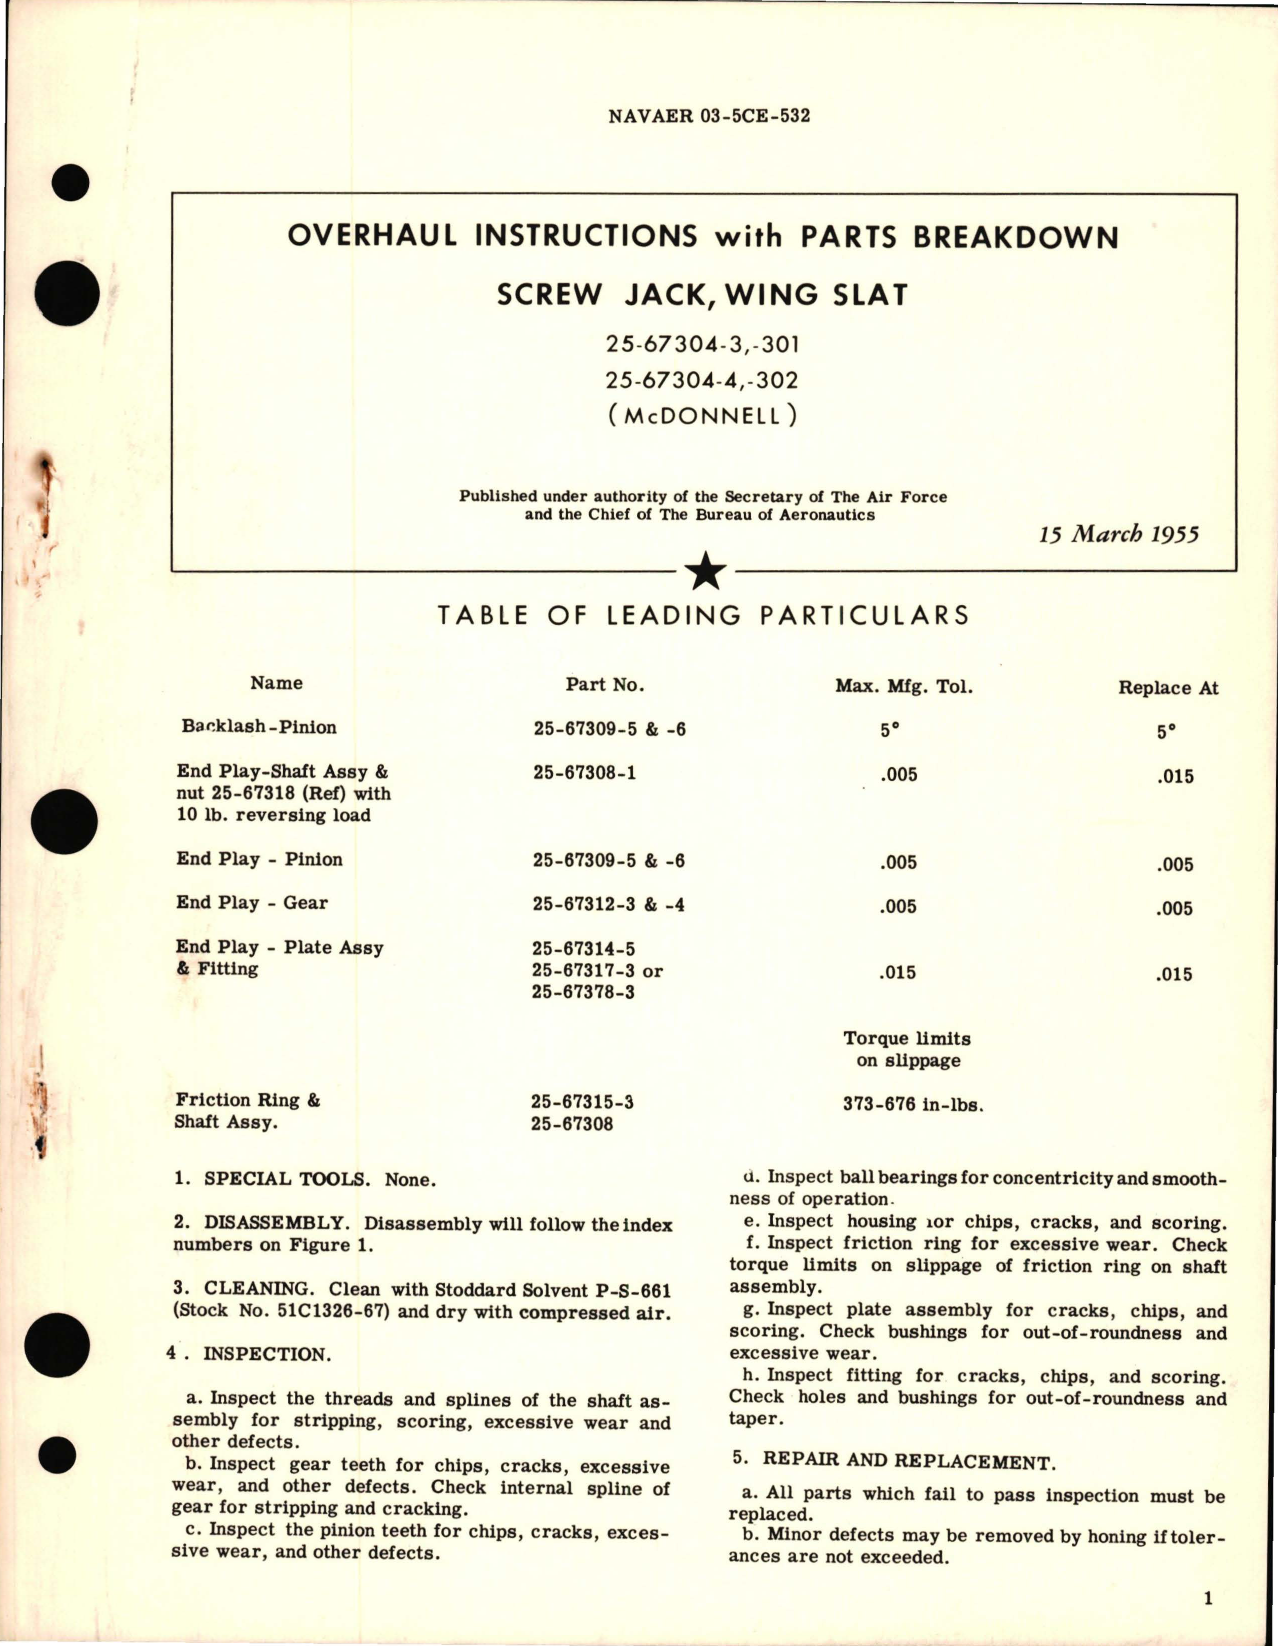 Sample page 1 from AirCorps Library document: Overhaul Instructions with Parts Breakdown for Screw Jack, Wing Slat - 25-67304-3, -301 and 25-67304-4, -302 